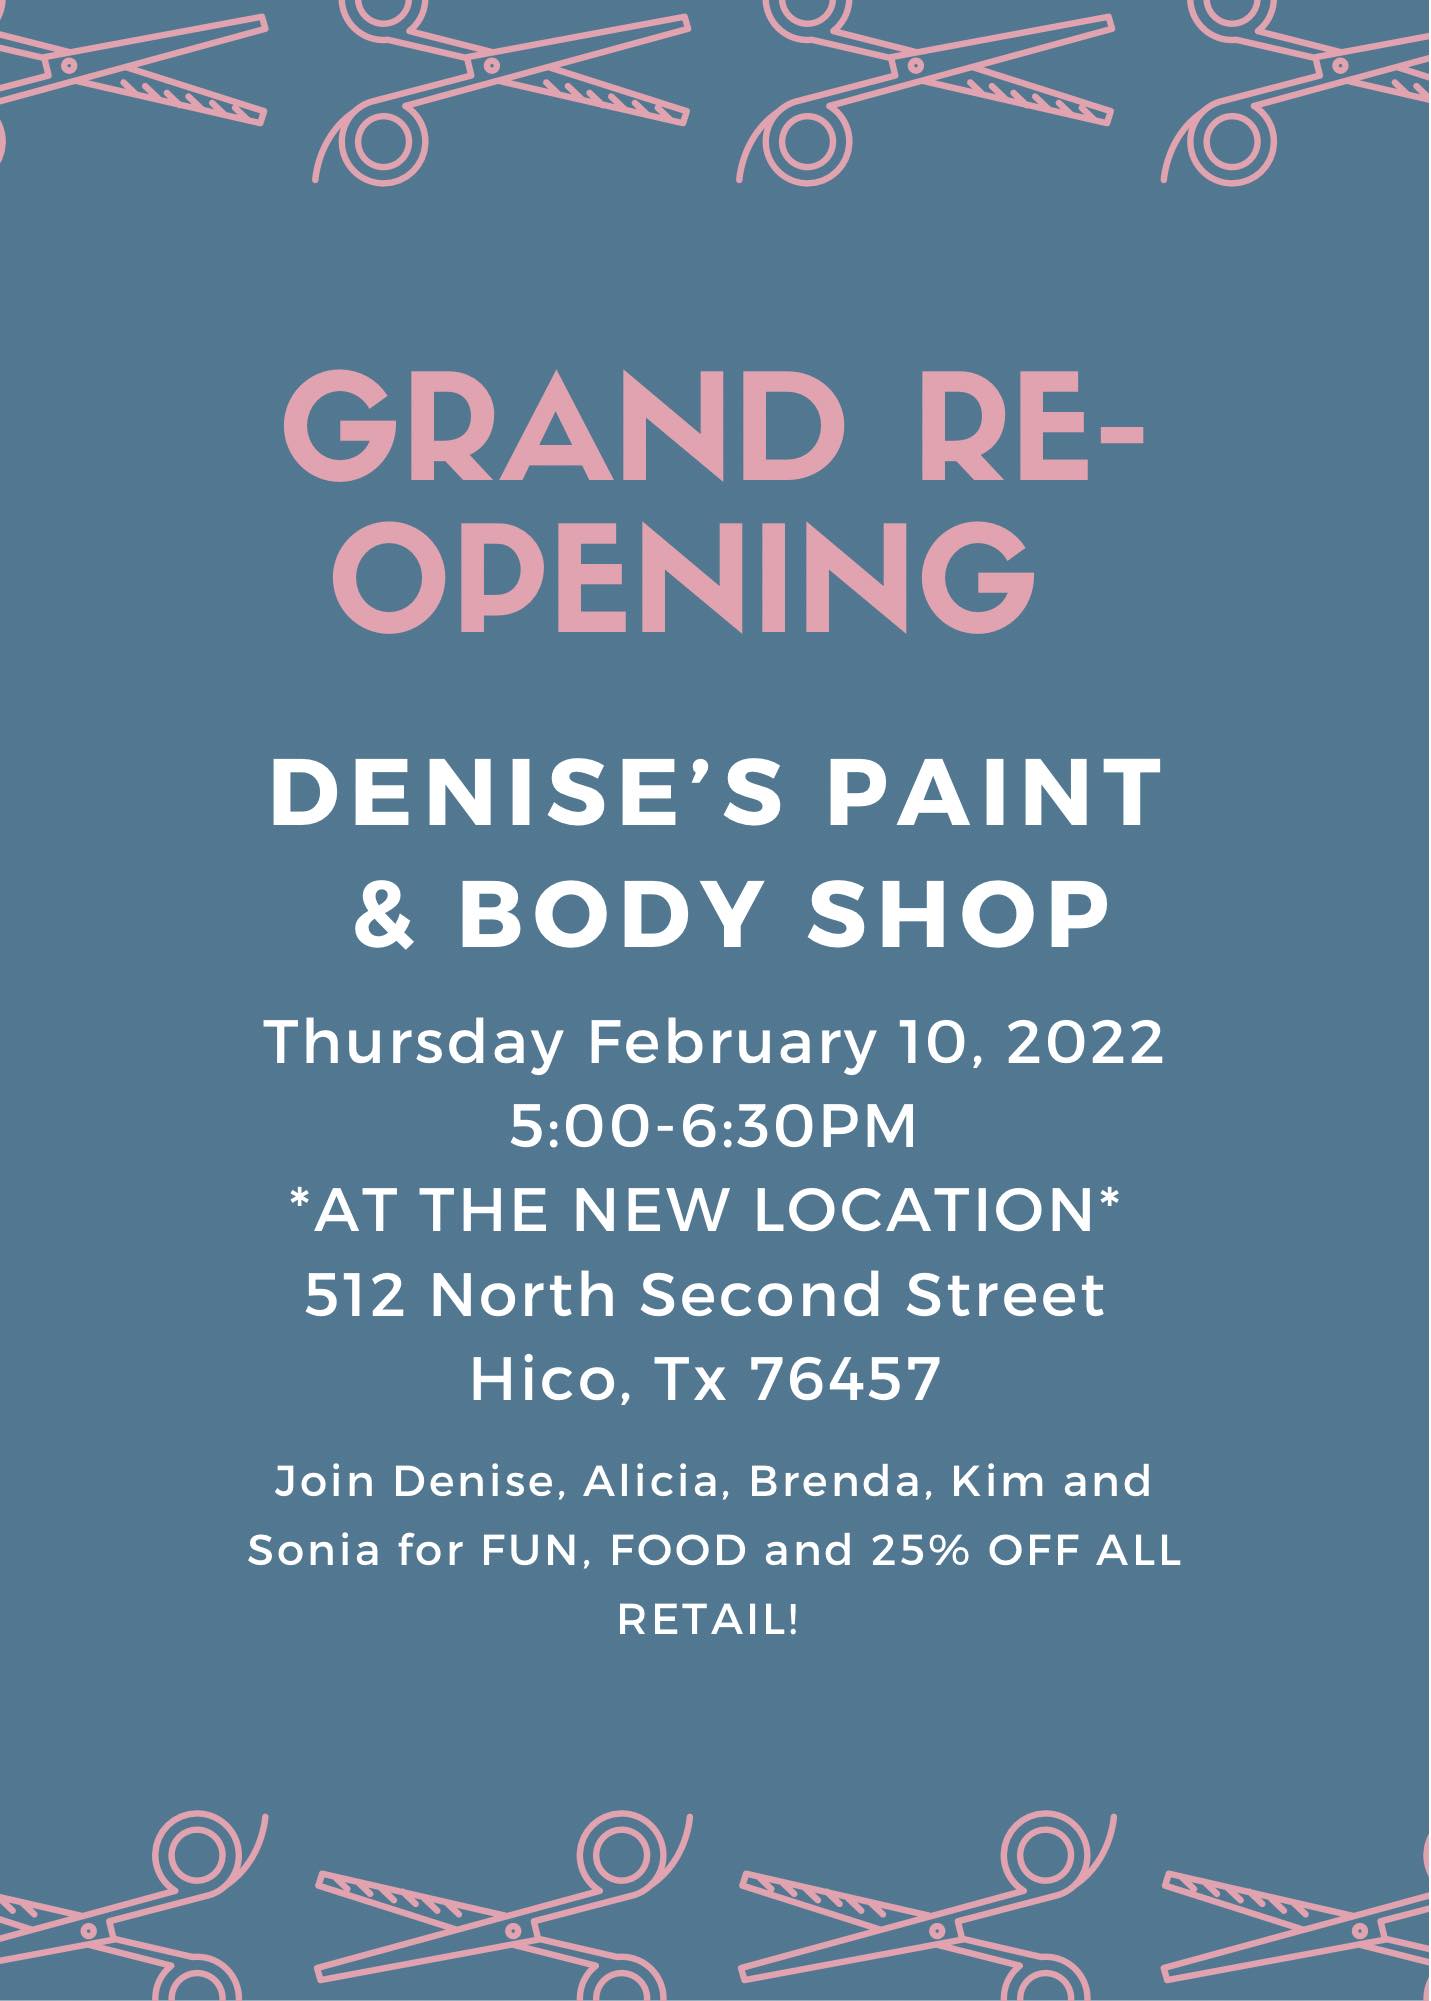 Denise's Paint & Body Shop 512 N 2nd St, Hico Texas 76457